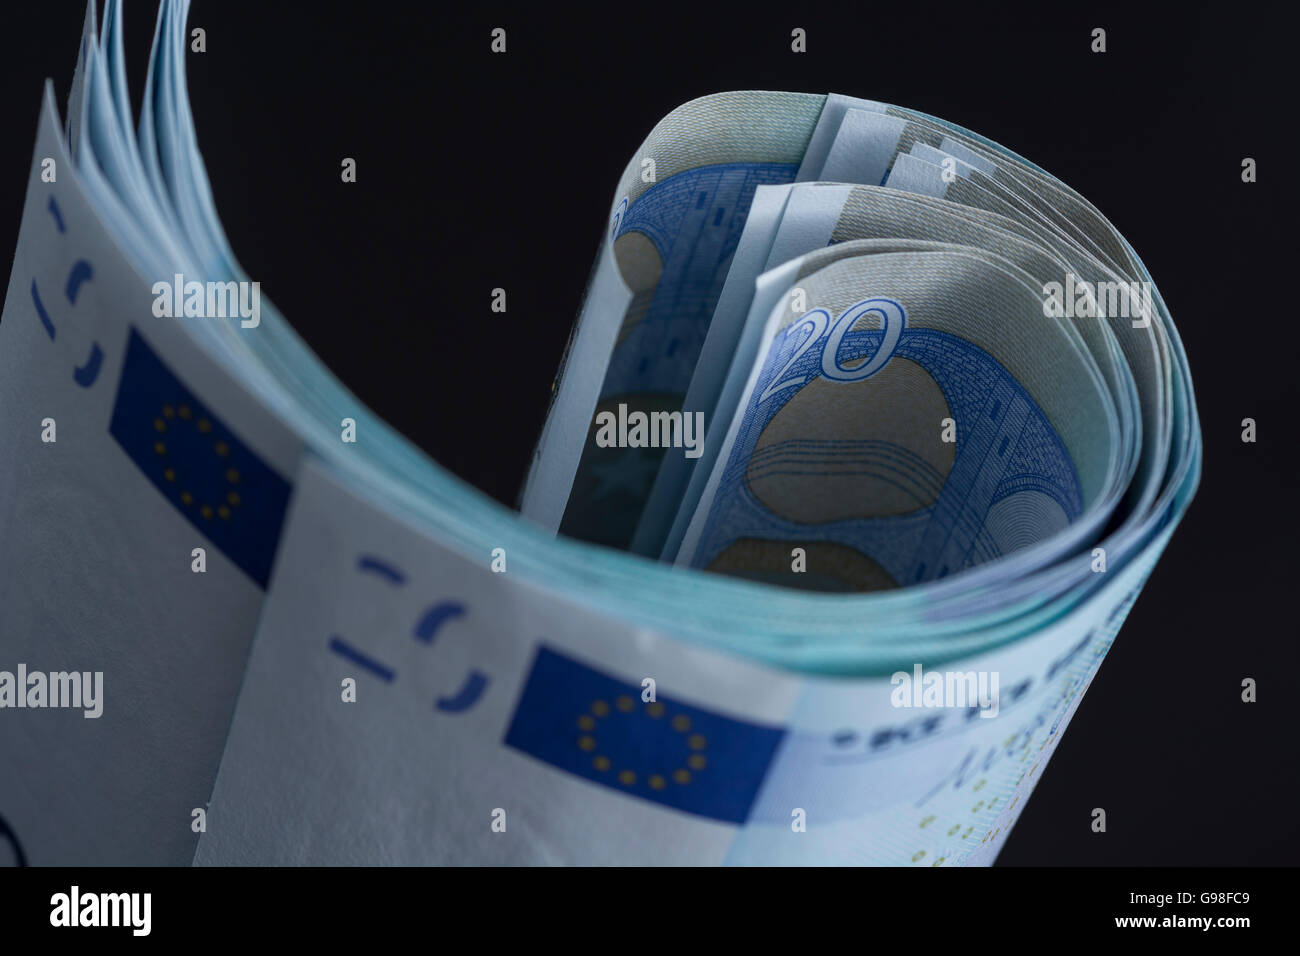 Concept of Euro zone, single market represented by a bundle of 20 Euro banknotes. Stock Photo